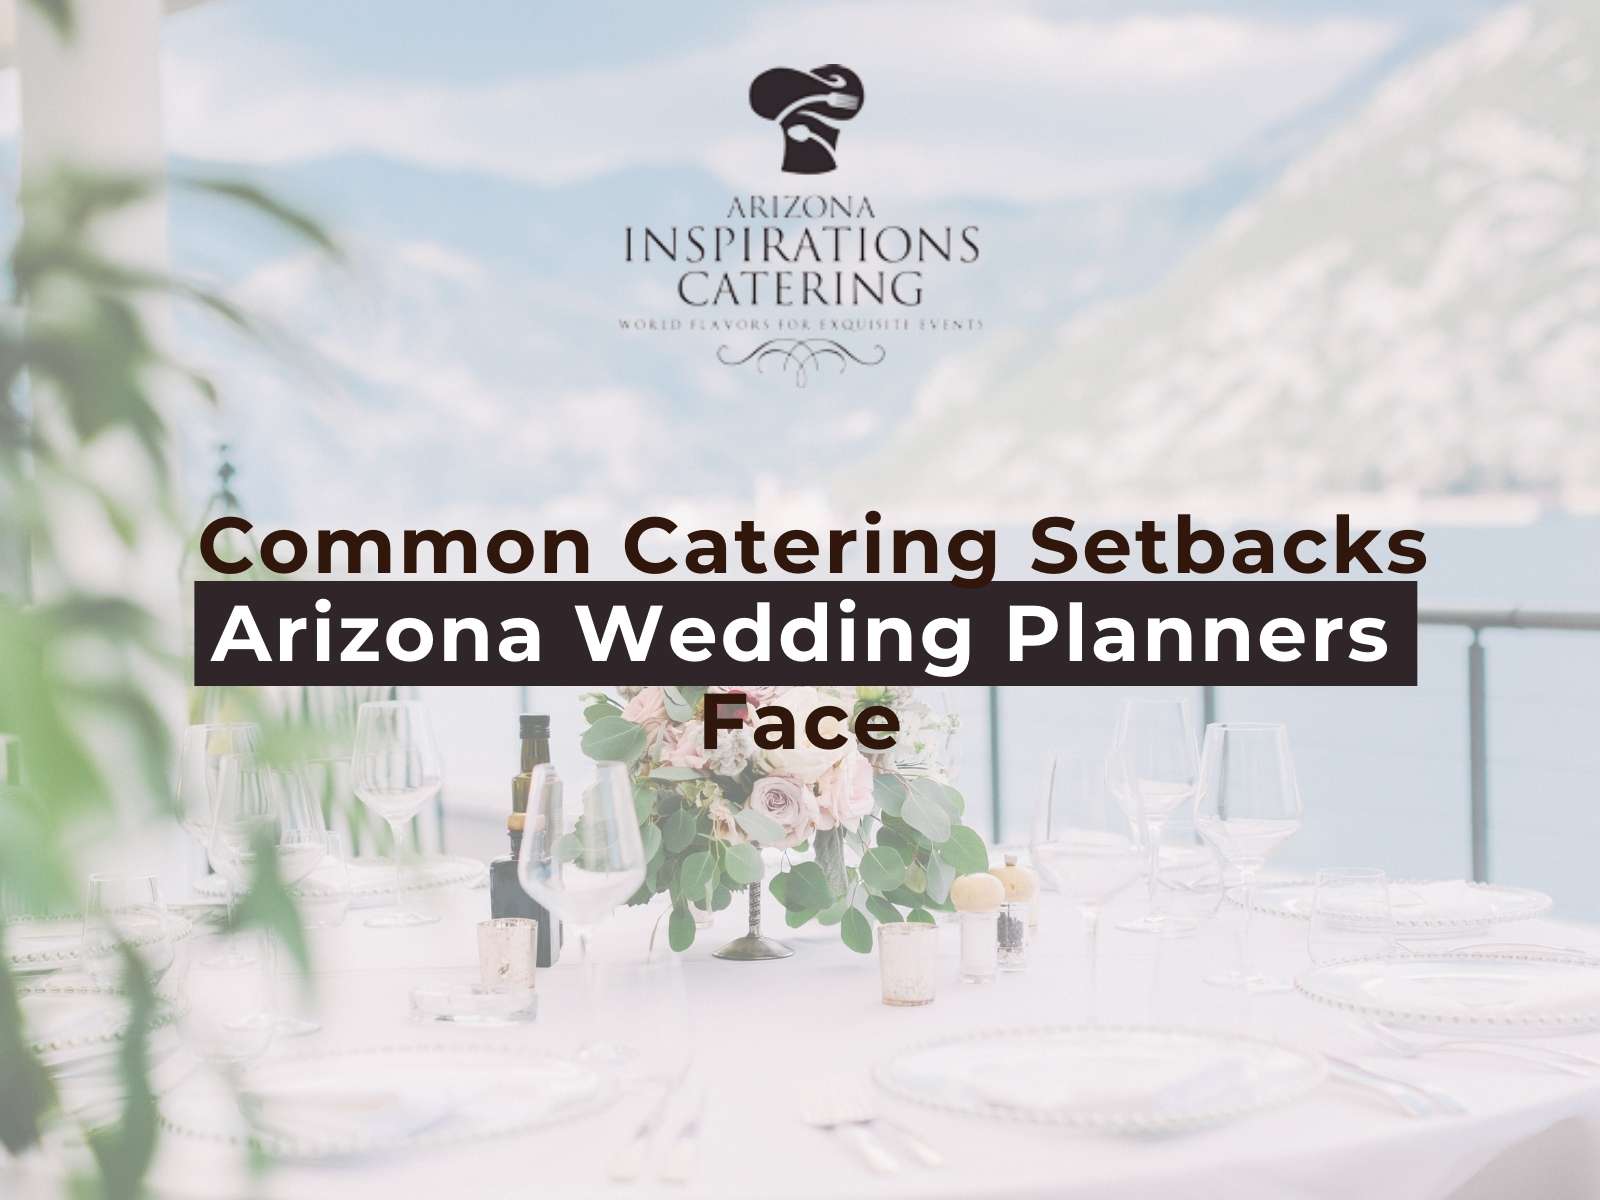 Common Catering Setbacks Arizona Wedding Planners Face